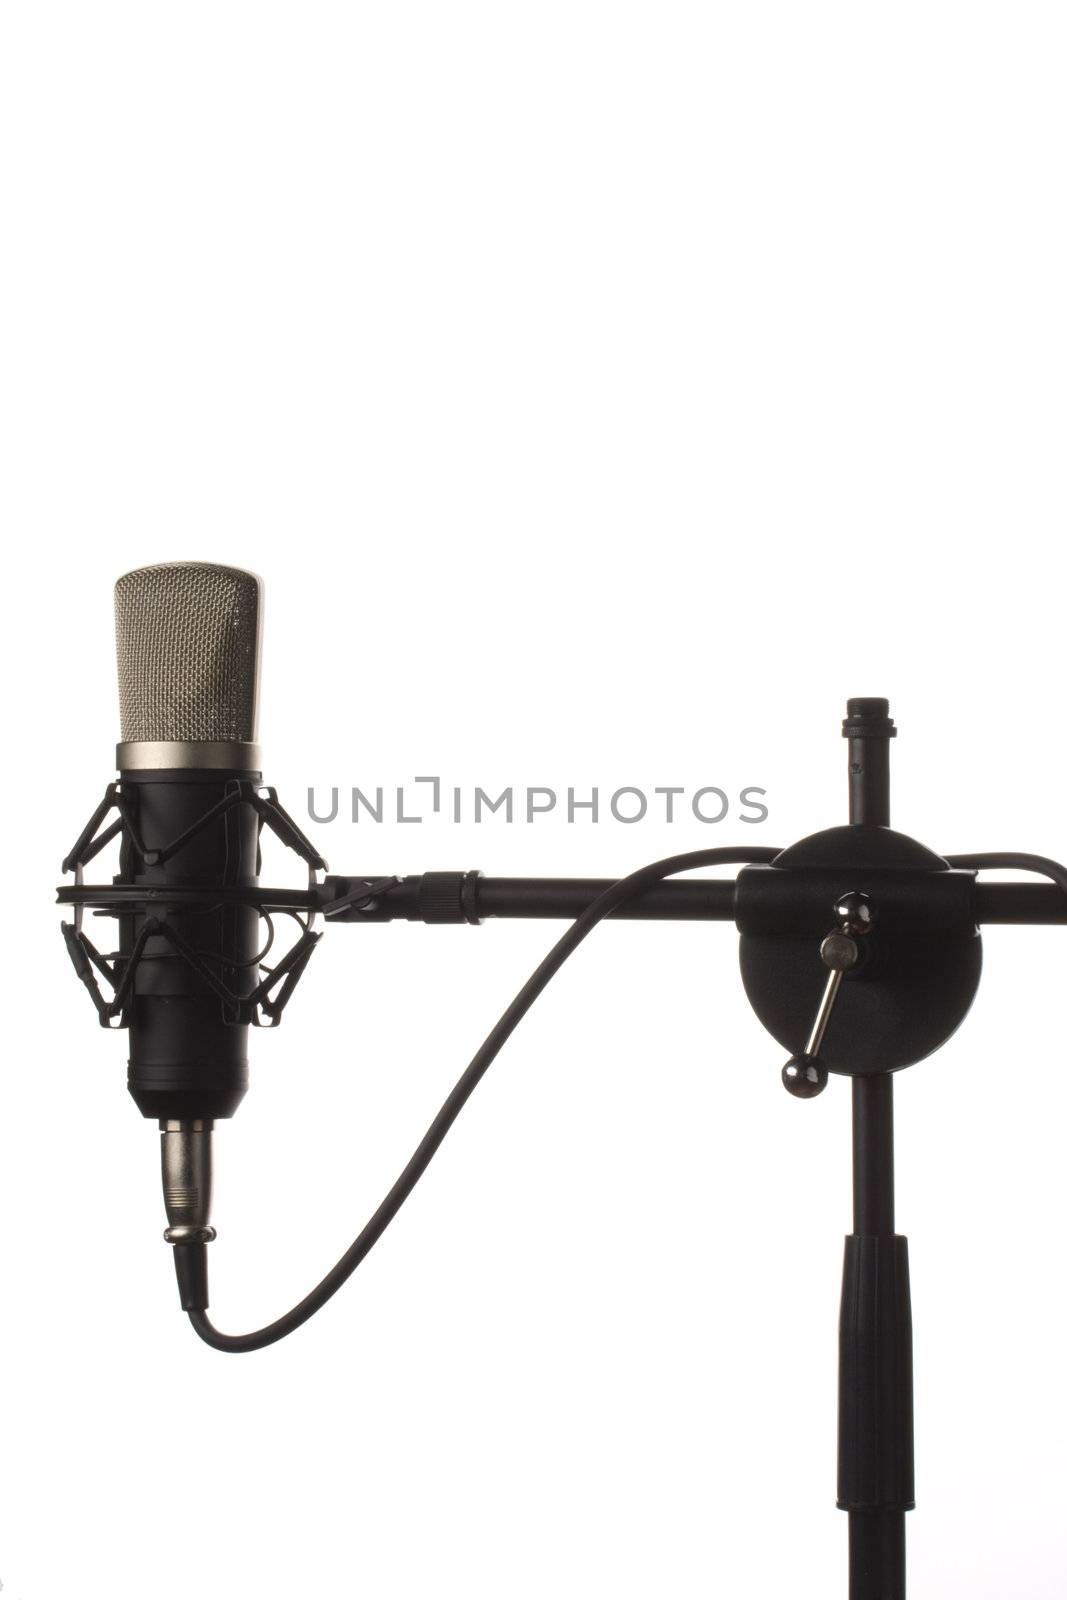 studio microphone on a stand